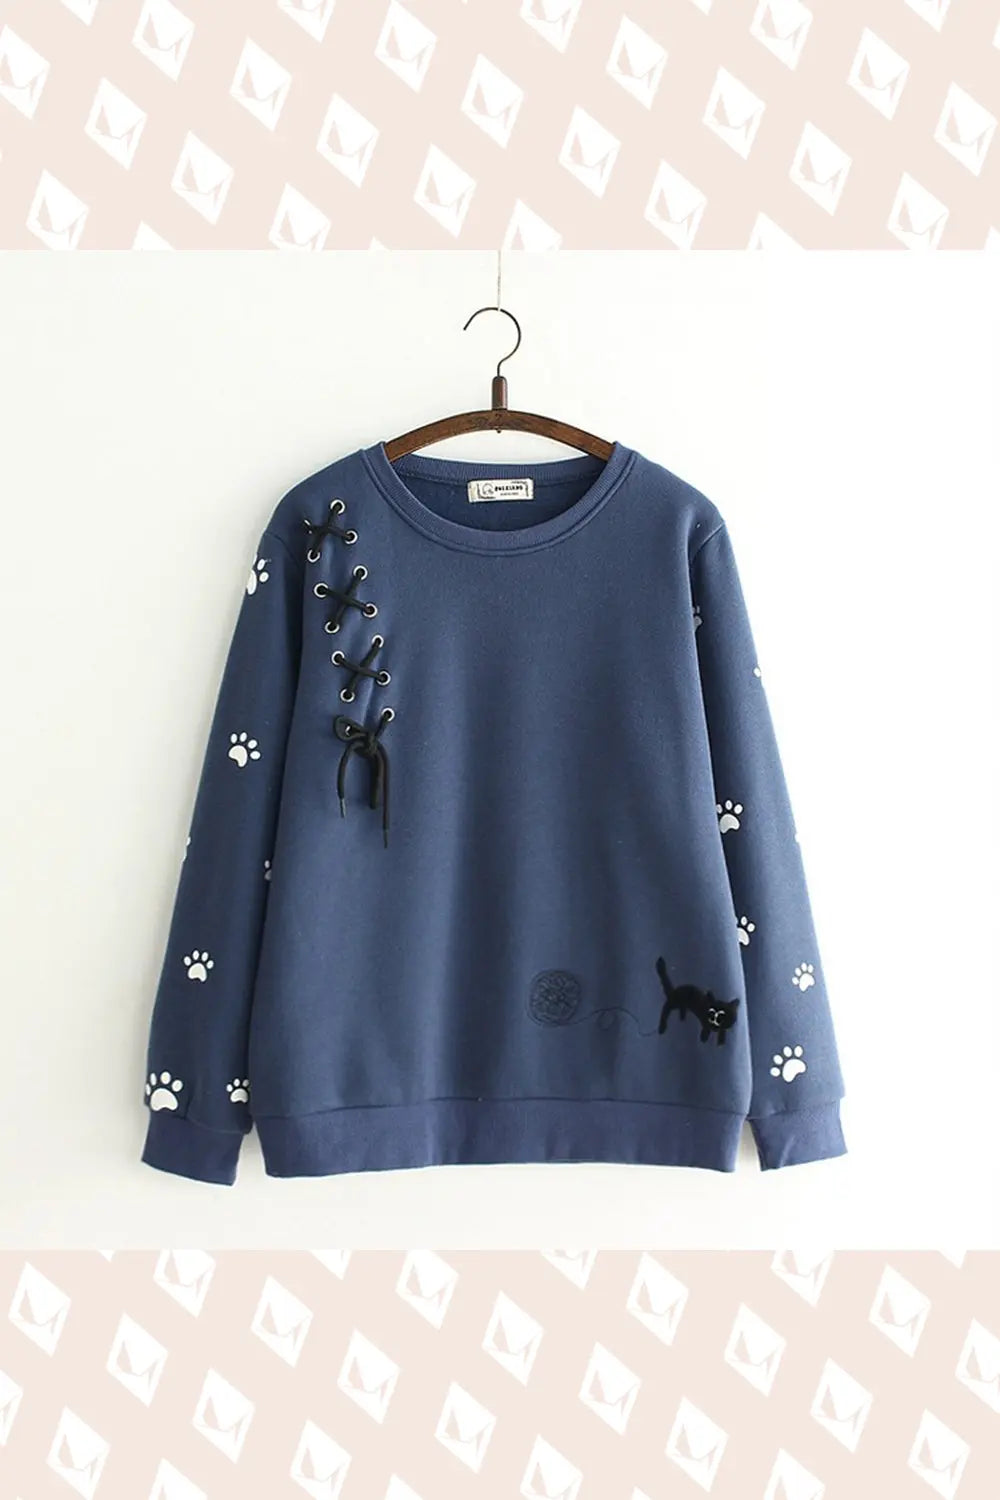 Embroidered Cat  Sweater - Navy Blue - Strange Clothes